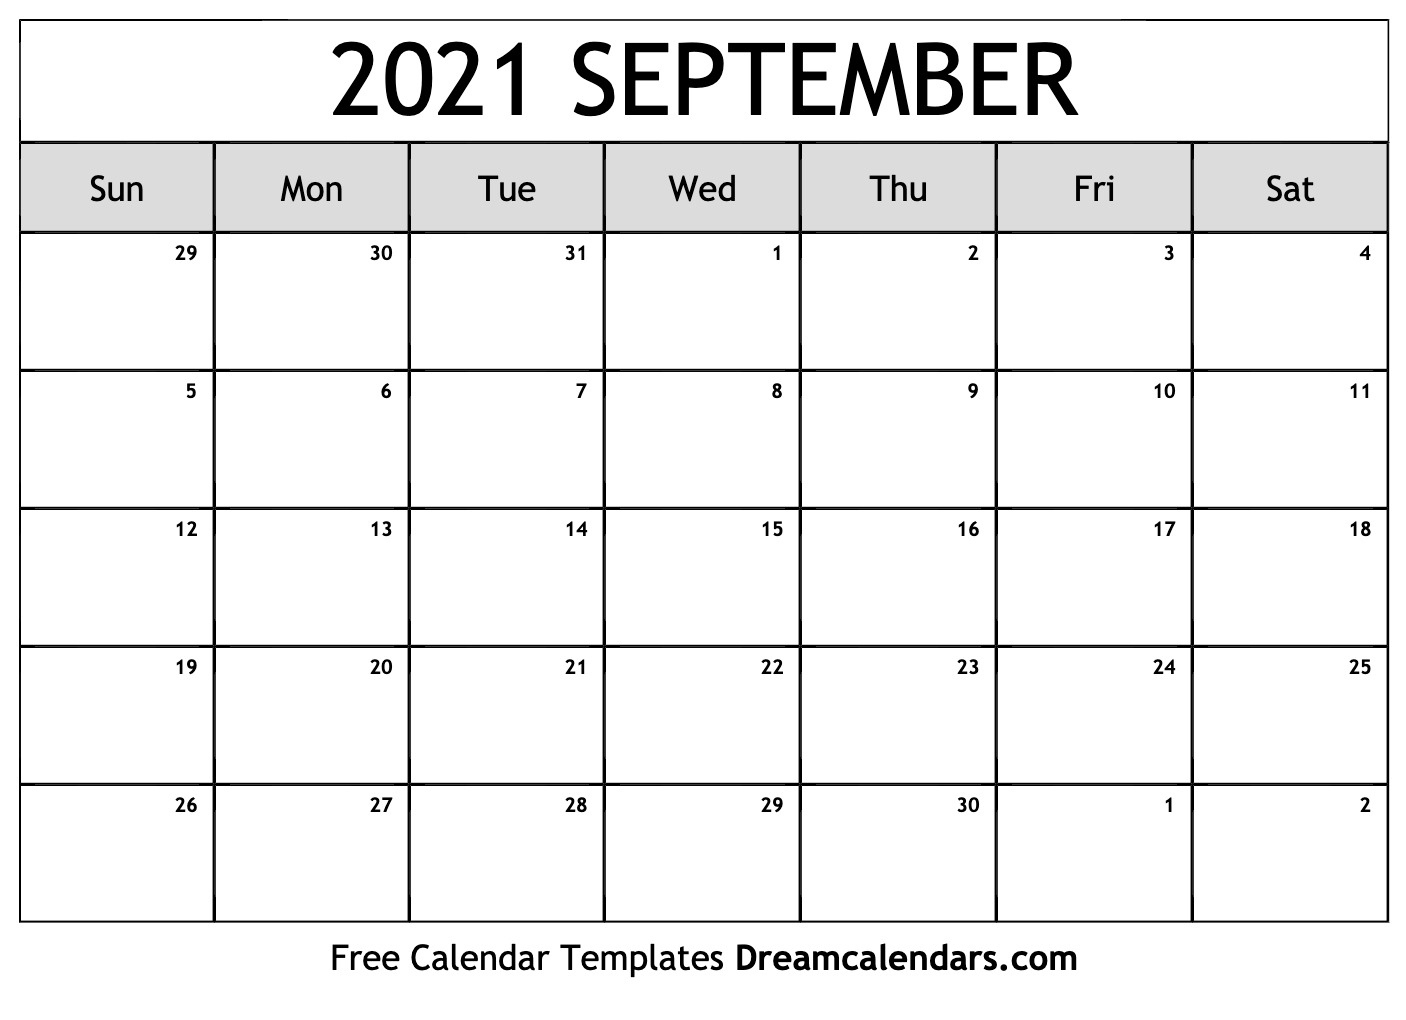 Print Free 2021 Calendar Without Downloading | Calendar Printables Free Blank Printable Calendar October 2020 To September 2021